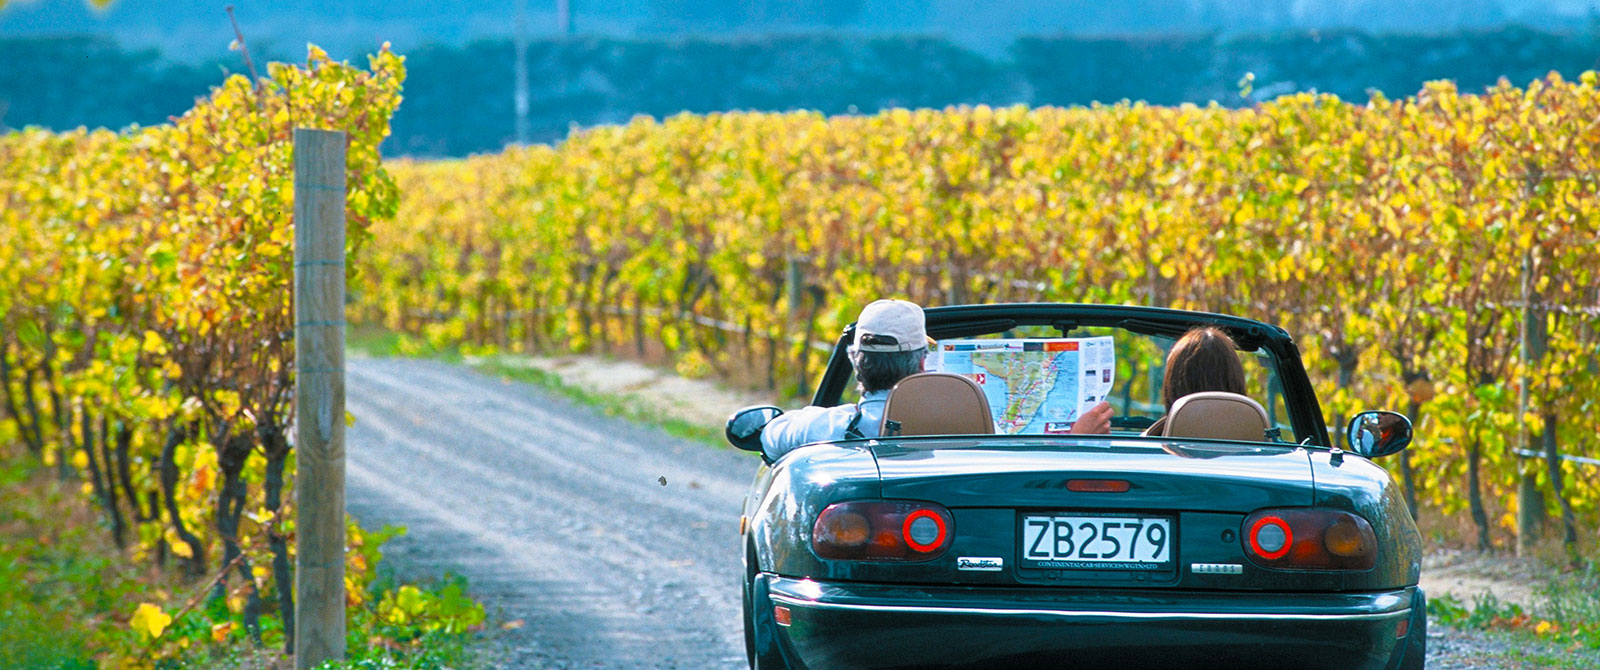 Self Driving the New Zealand Wine Trail - Book Your Trip to New Zealand - New Zealand Travel Agency